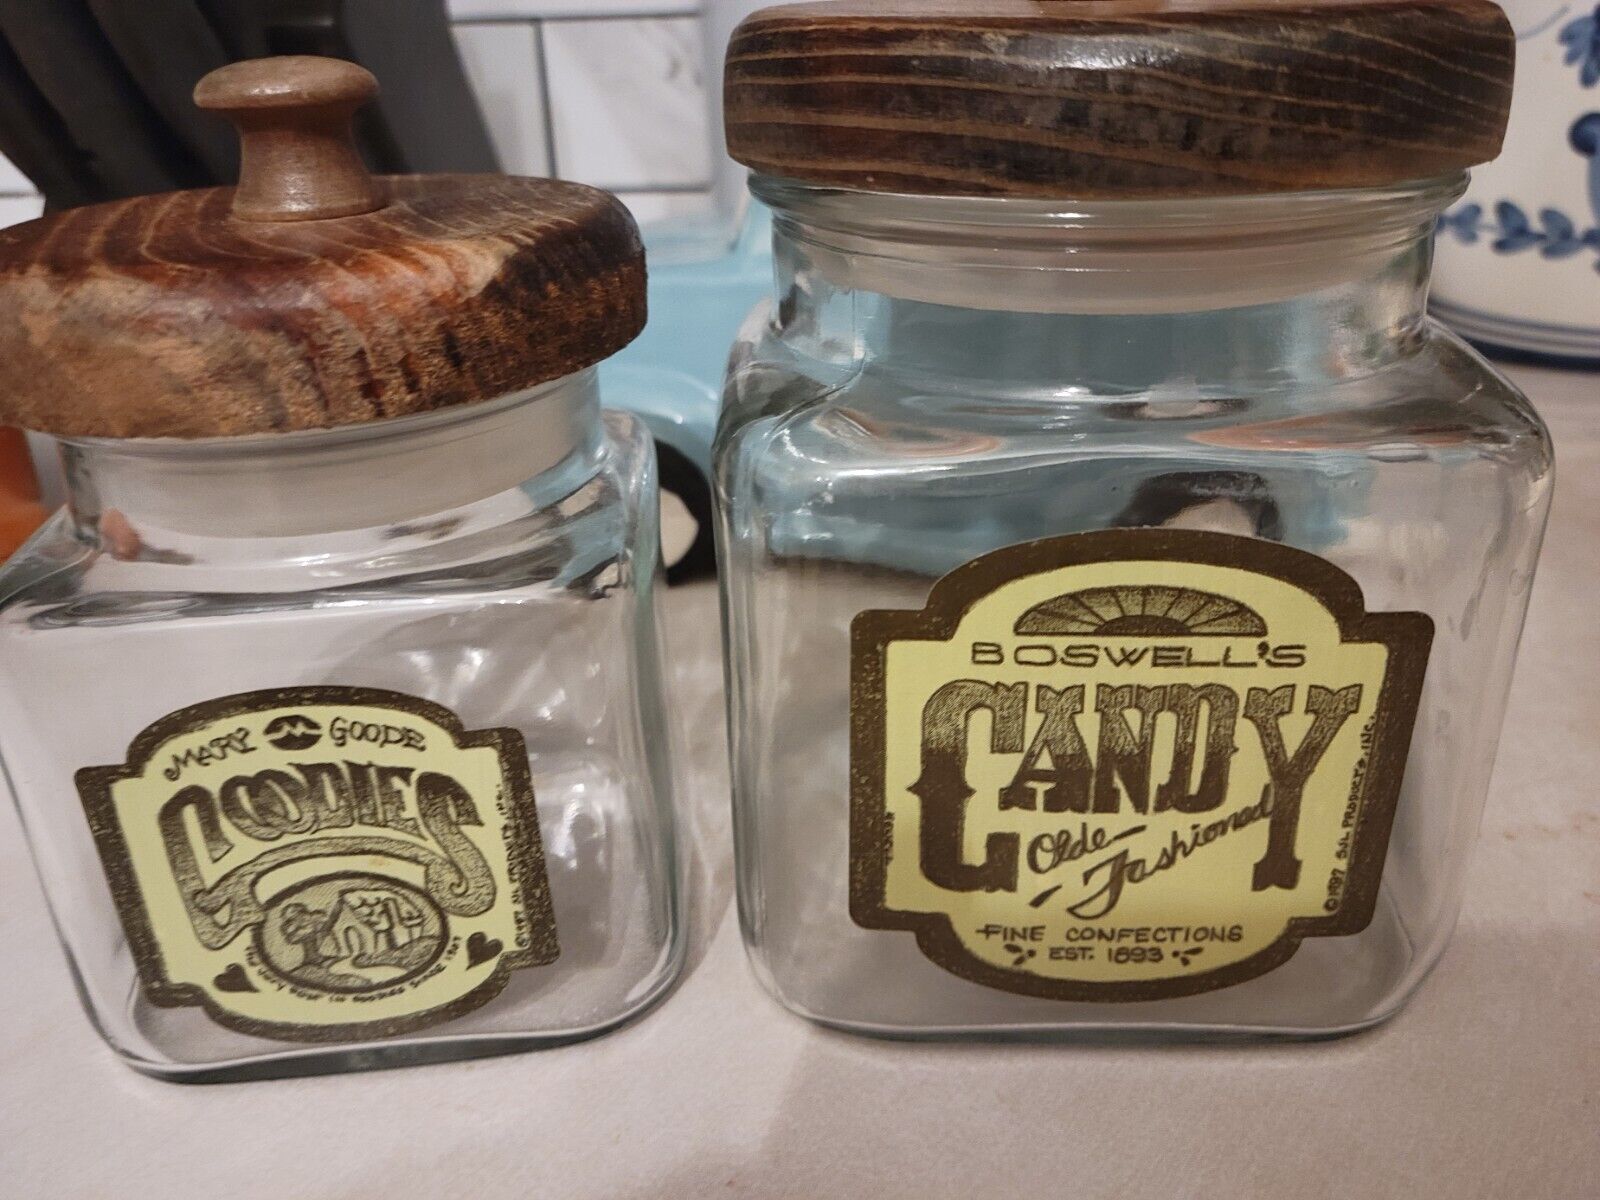 1987 Boswell’s Candy Glass Canister Jar SJL Products Anchor Hocking Vintage Wood